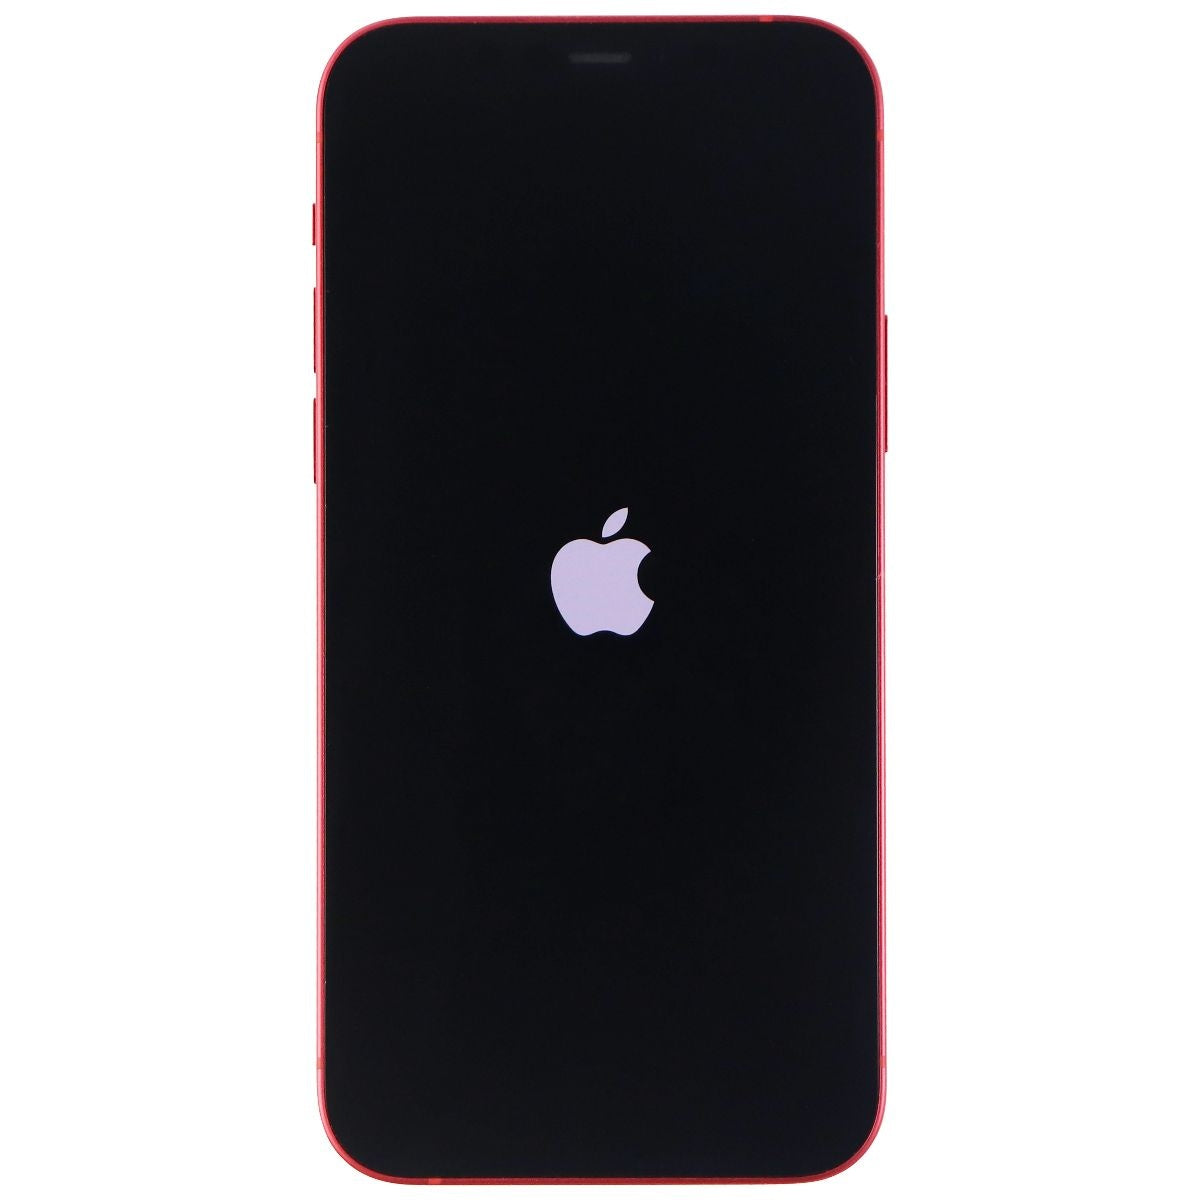 Apple iPhone 12 (6.1-inch) Smartphone (A2172) Unlocked - 64GB / Red